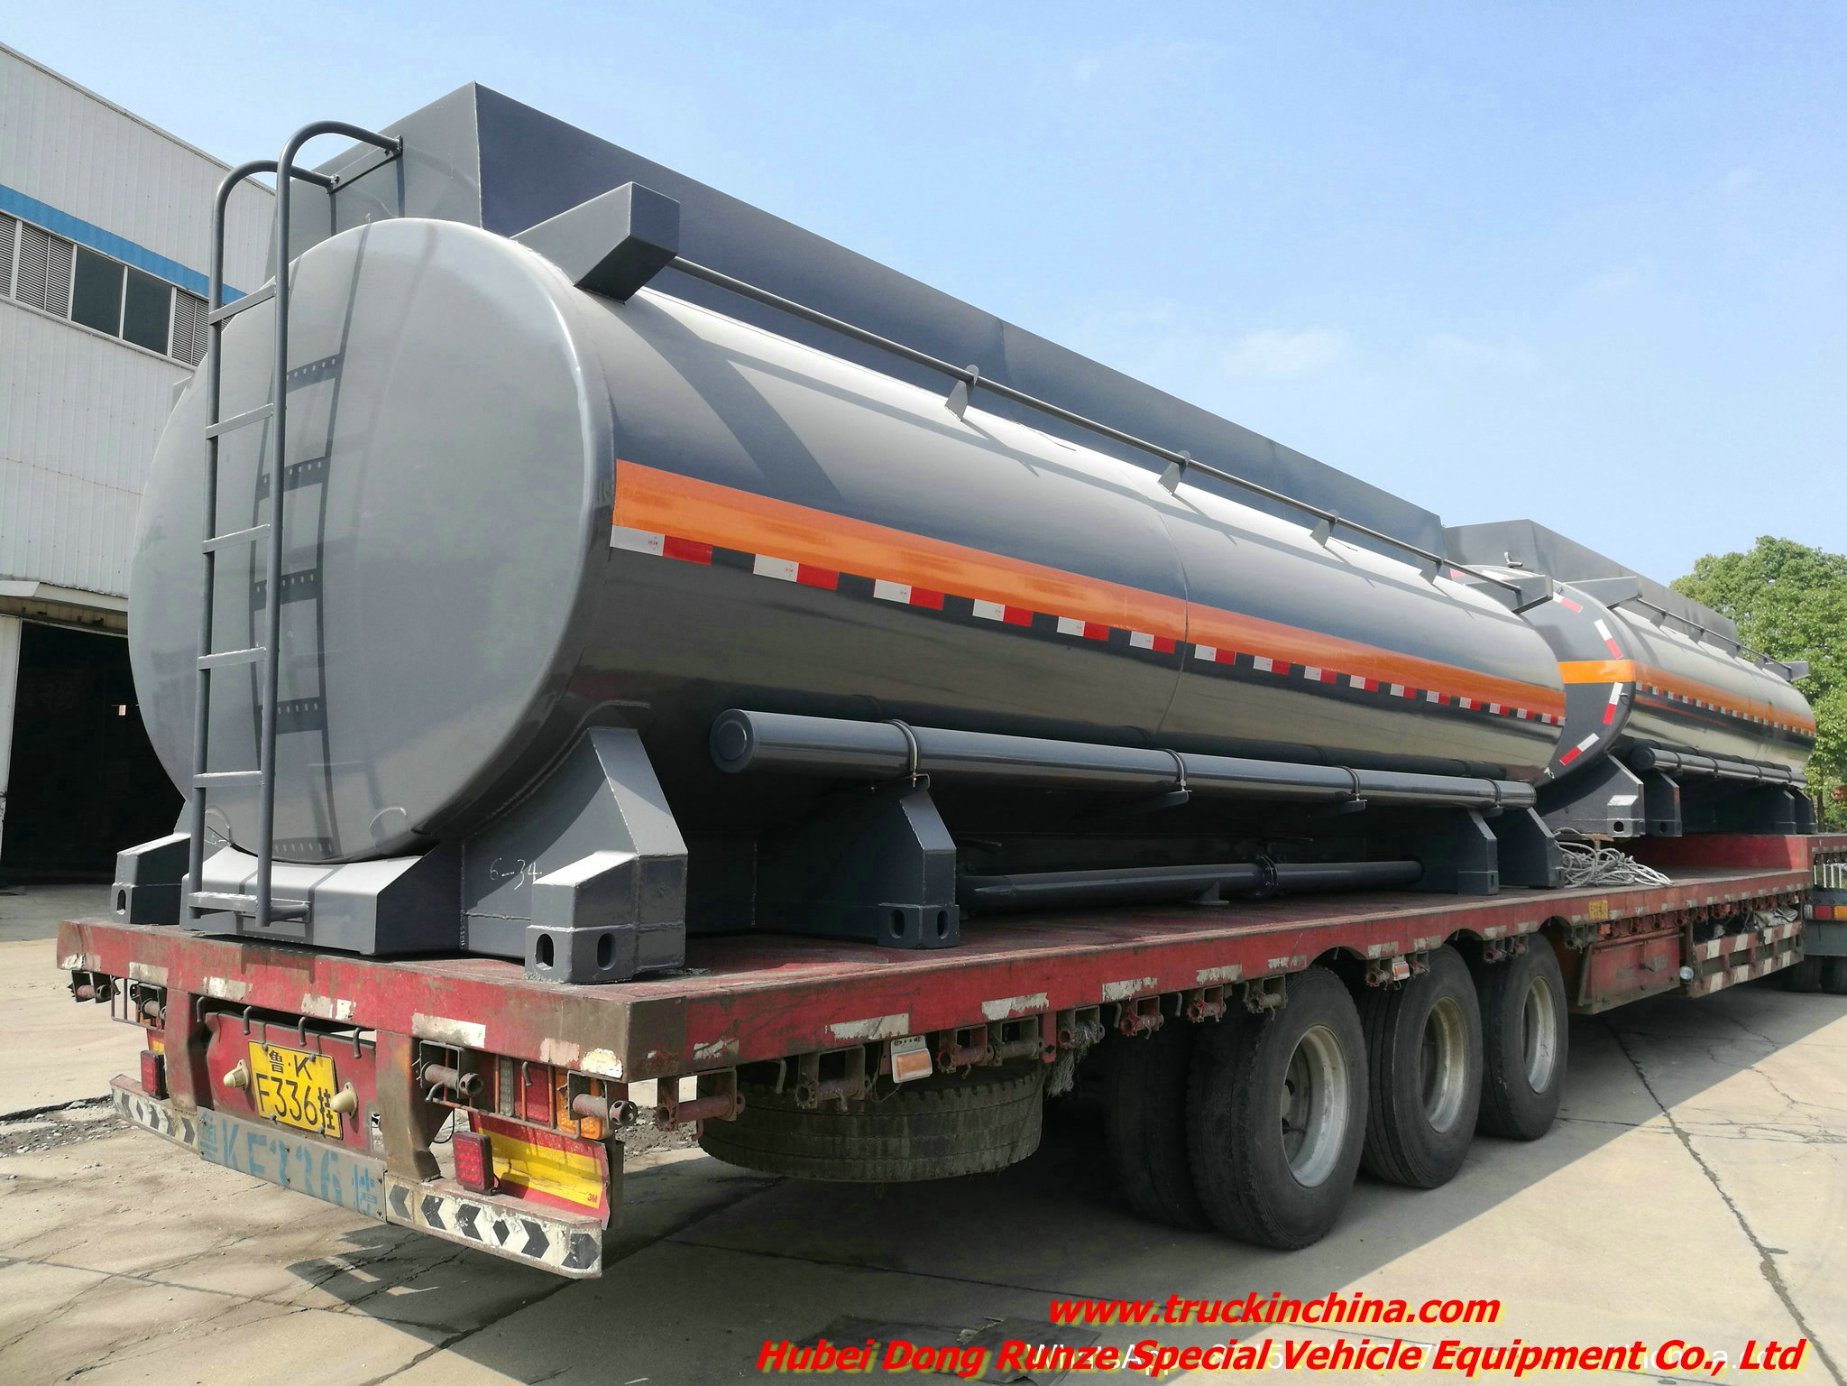 Chemical Liquid Tanker Body with Container Locks Trailer Road Transport 5000USG-6000USG (Solution HCl,NaOH,NaCLO,PAC,H2SO4,HF,H3PO4,H2O2 Store Tank Lined PE)